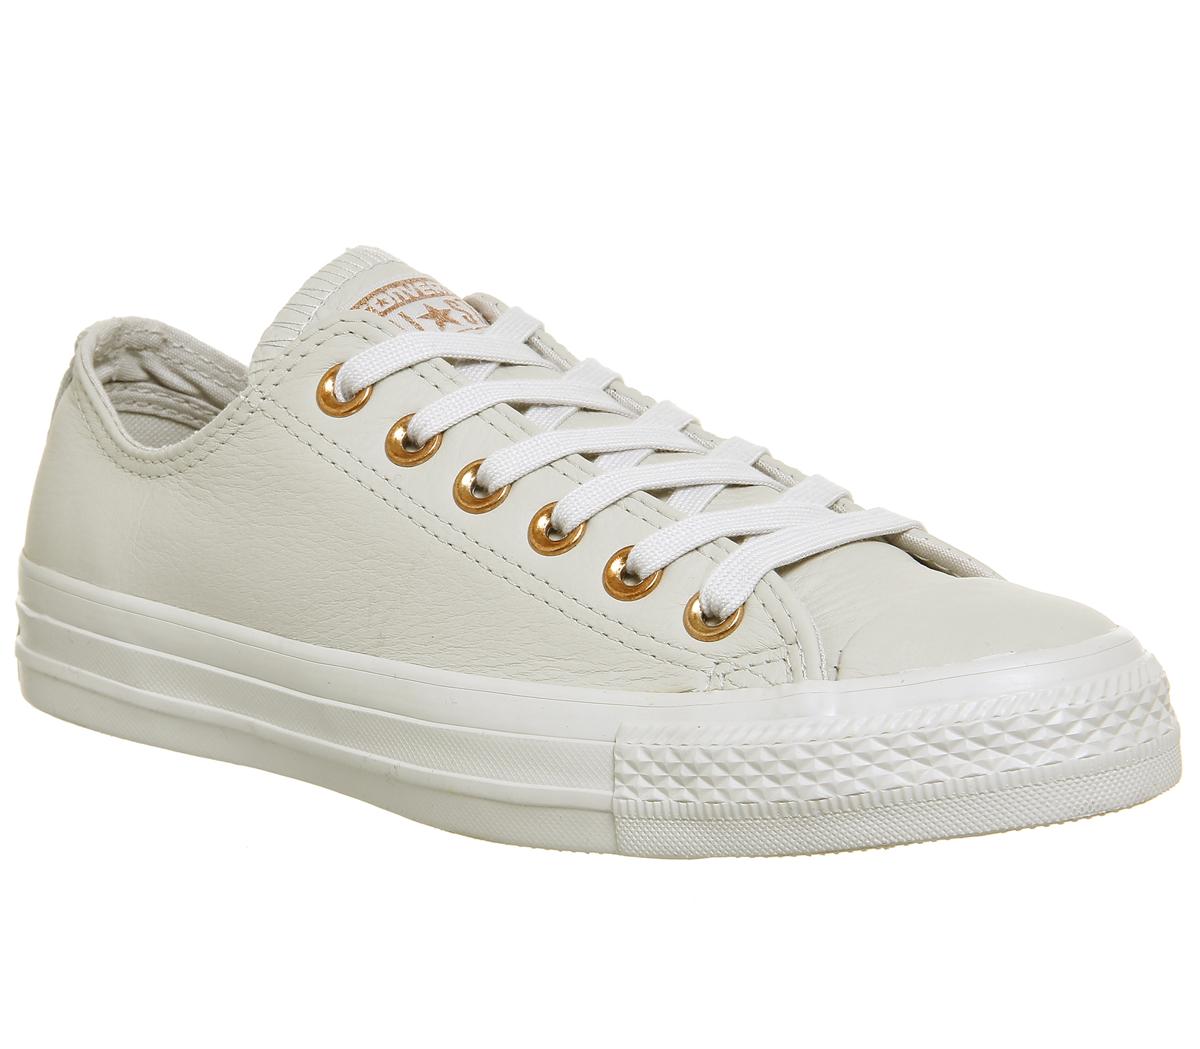 white leather converse rose gold, OFF 